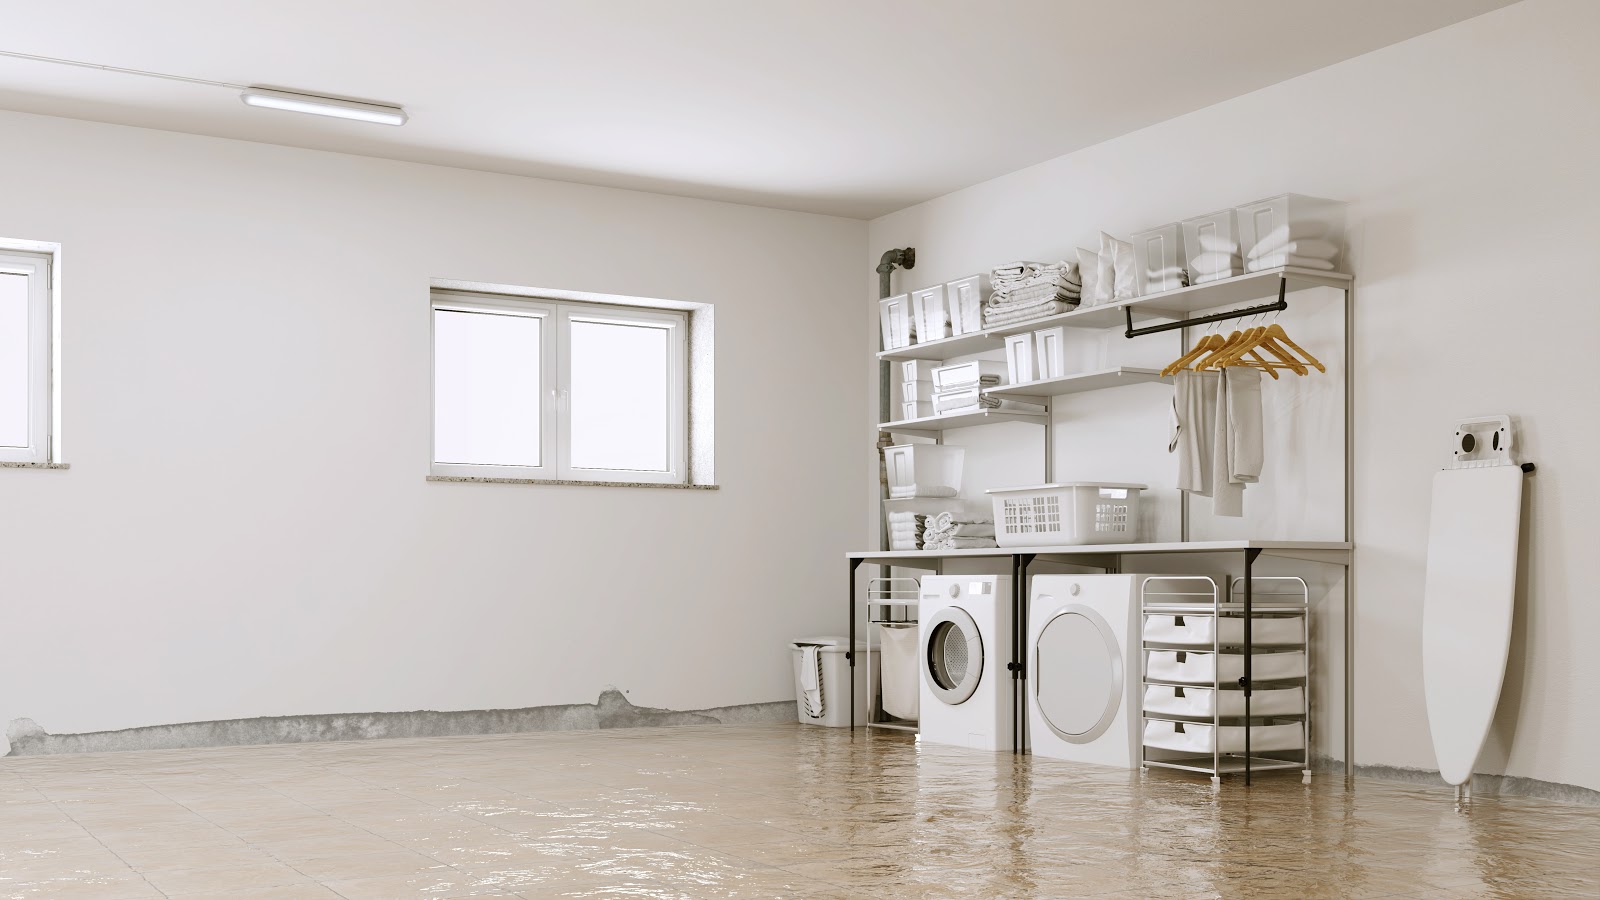 Come Home to Disaster? We Can Get You Back to Normal